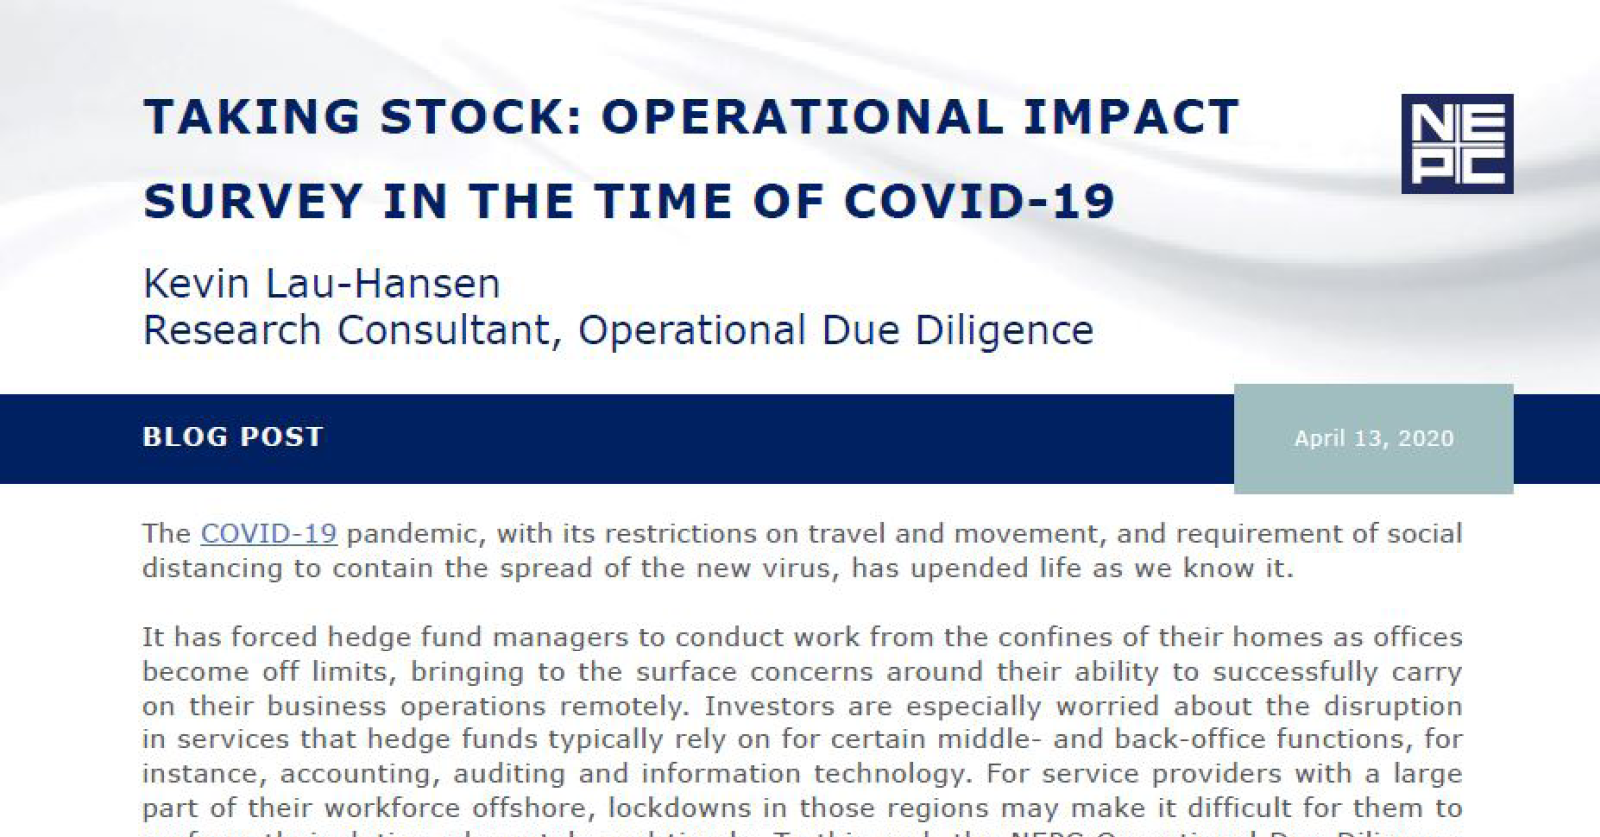 Operational Impact Survey in the Time of COVID-19